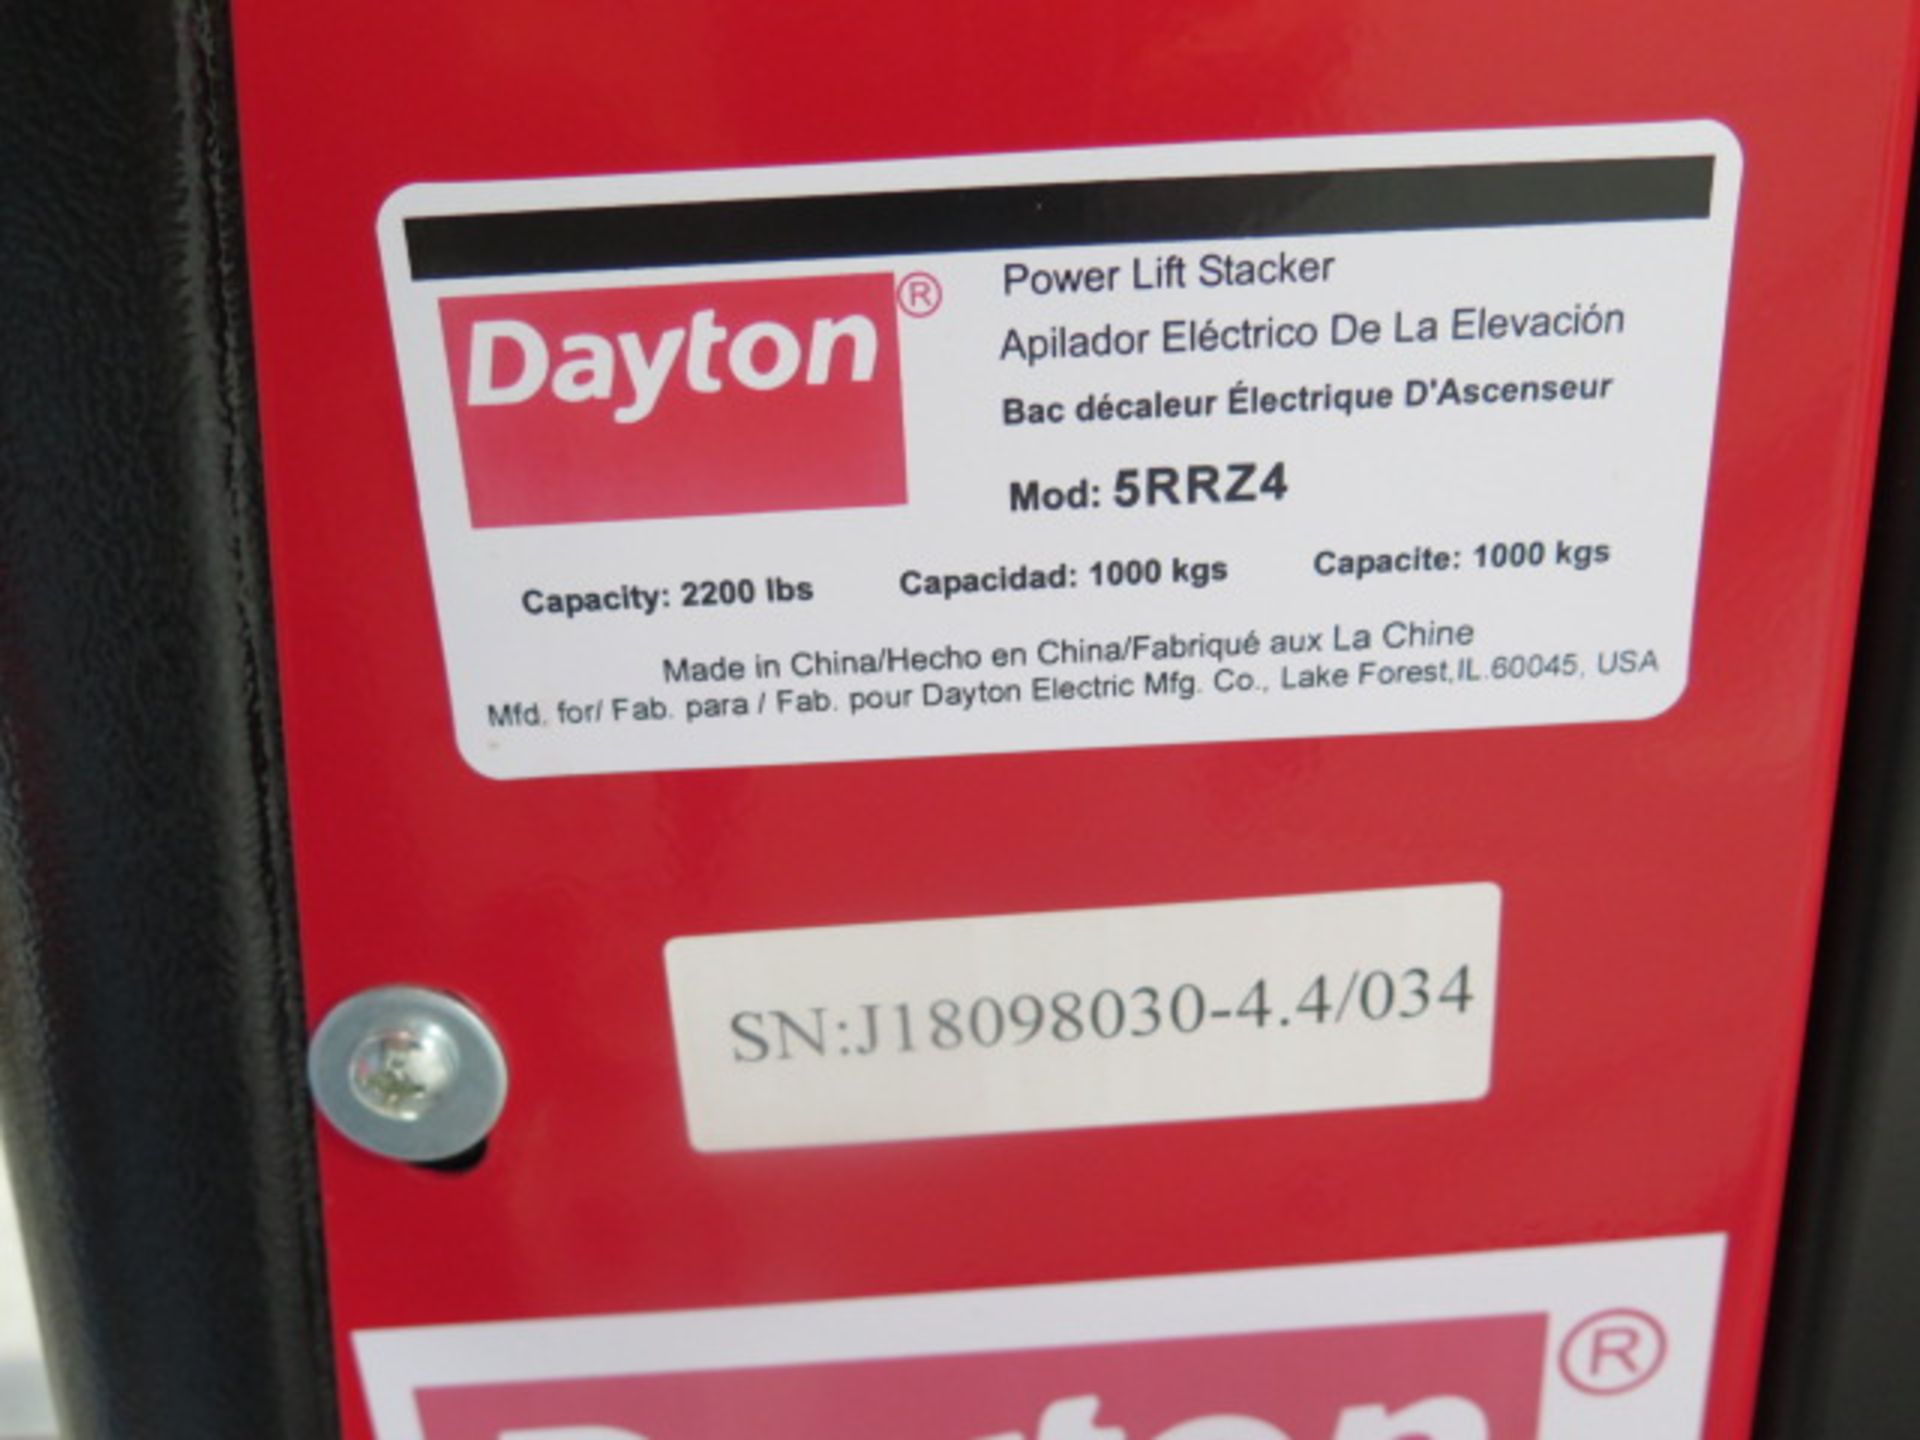 Dayton 5RRZ4 2200 Lb Cap Electric Pallet Mover s/n J18098030-4.4/034 w/ Charger SOLD AS-IS - Image 12 of 12